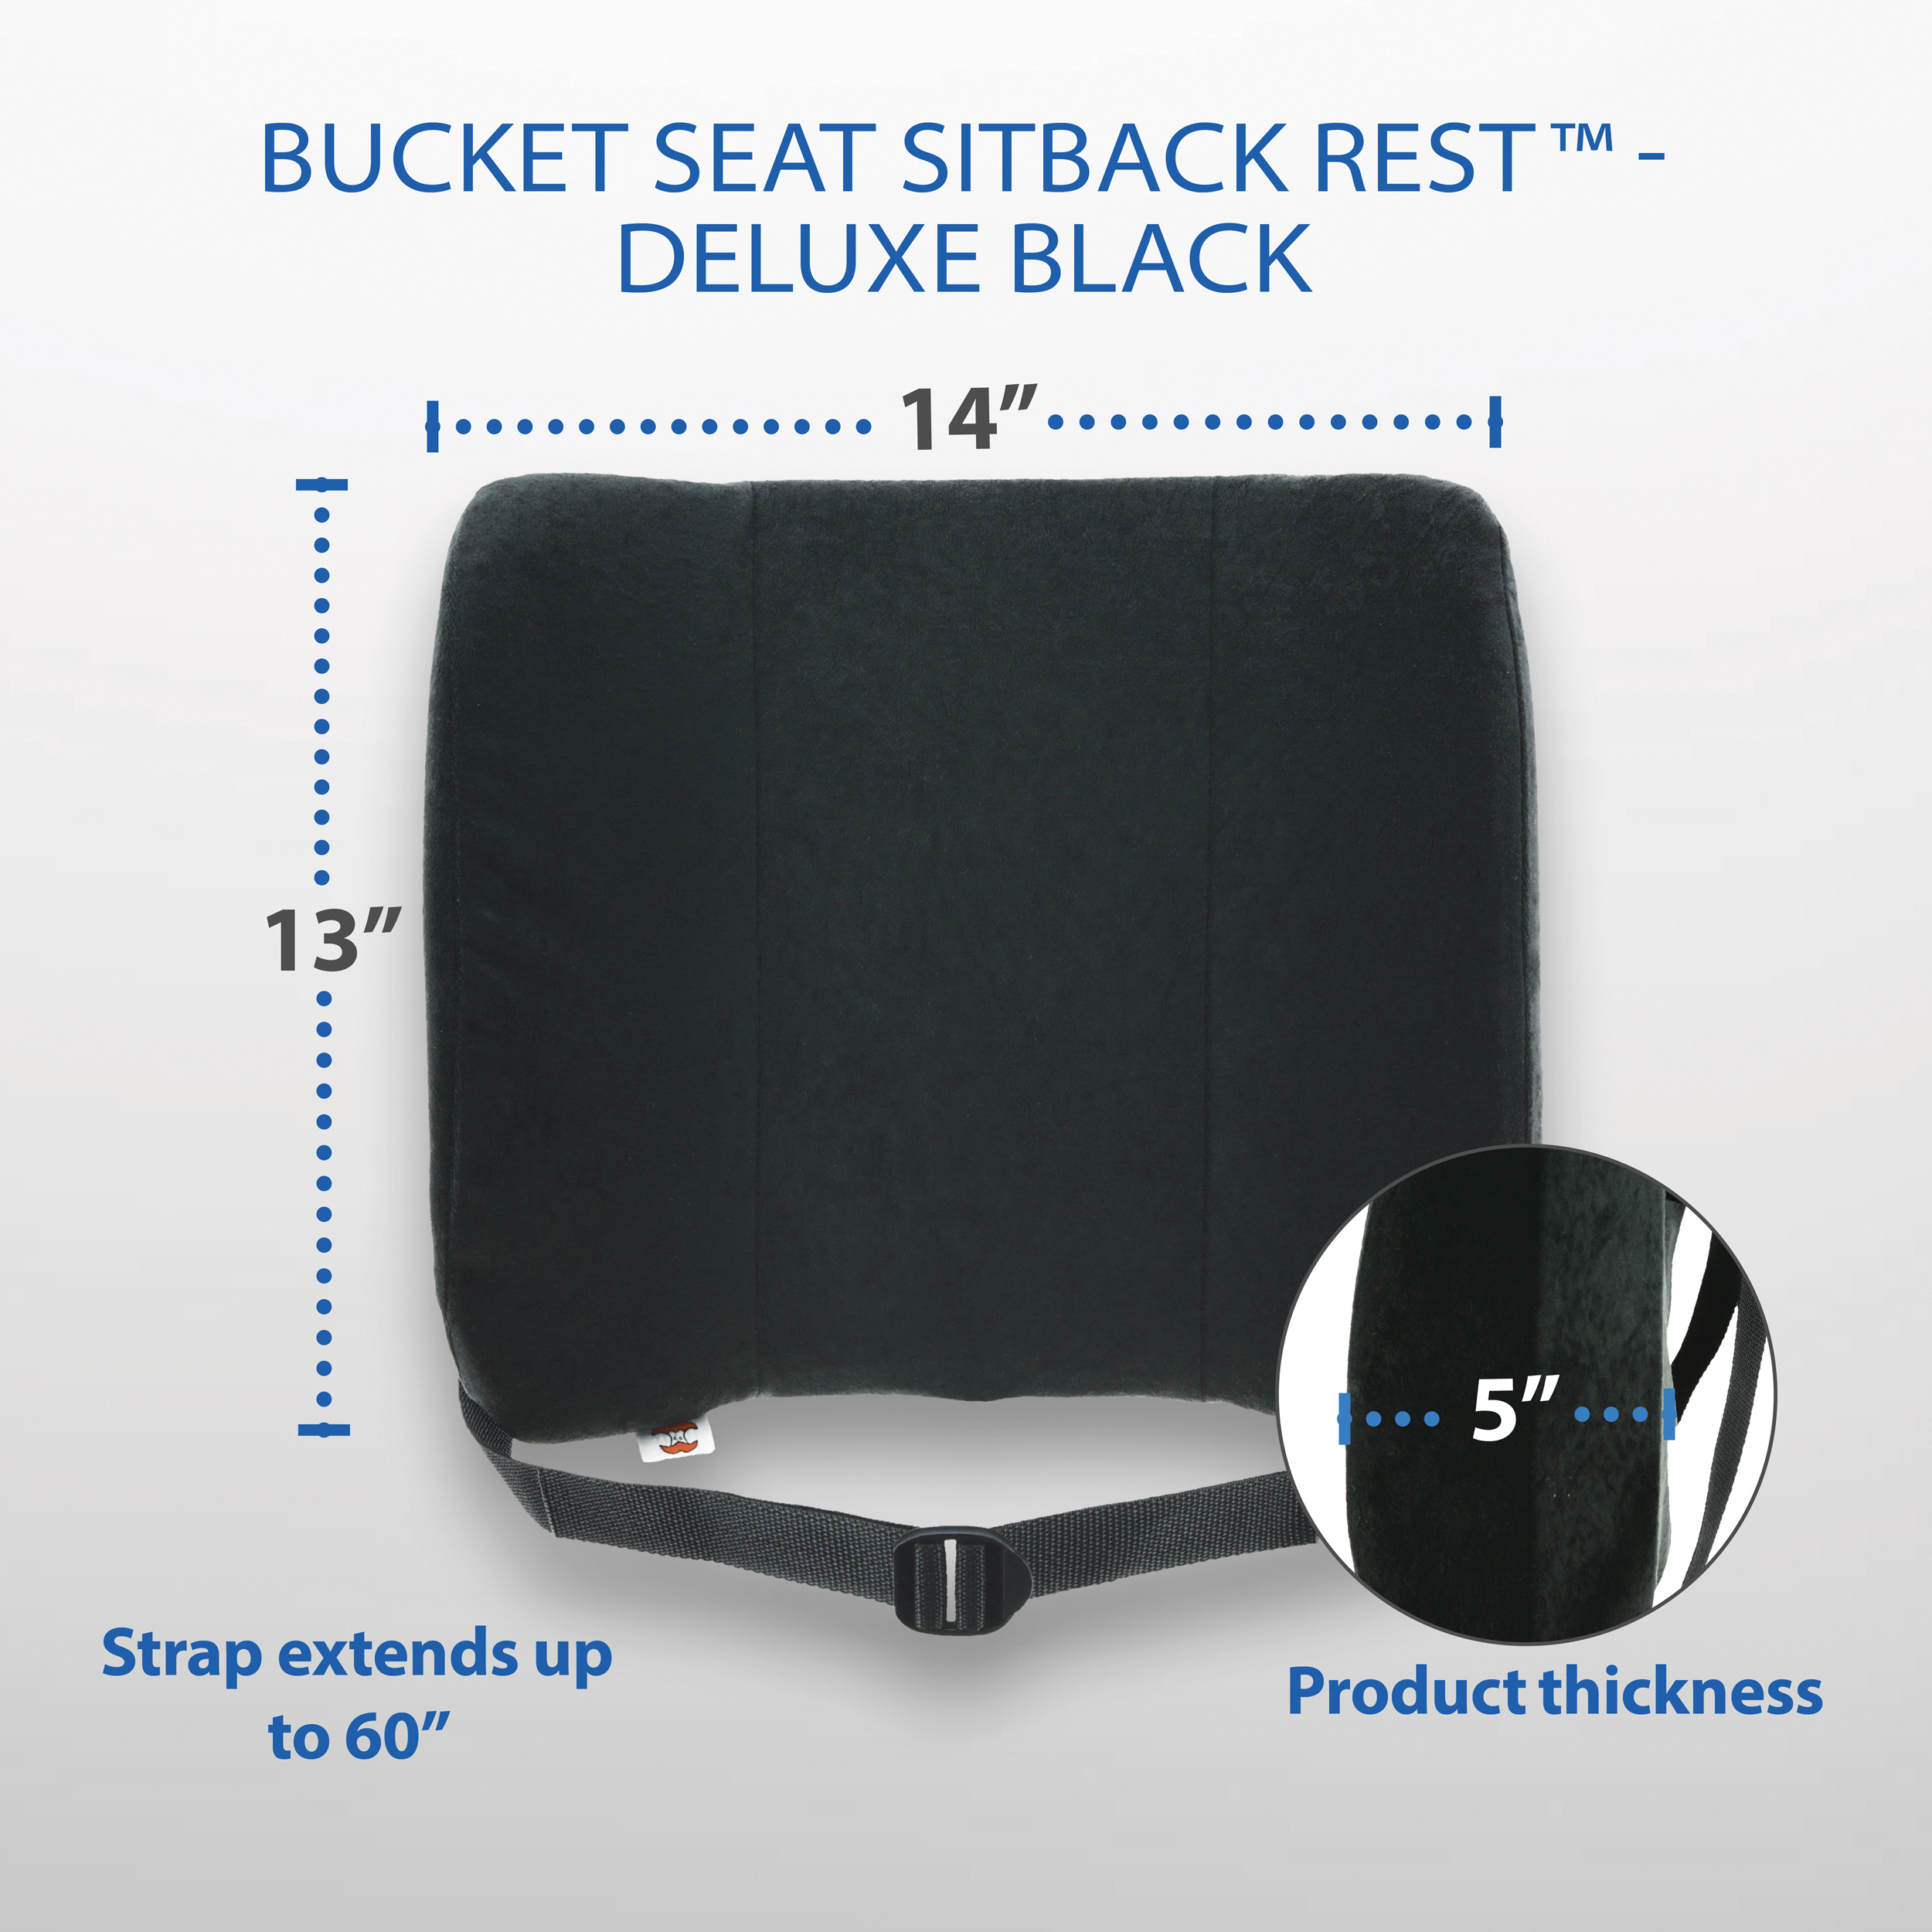 Seat with backrest for a bucket